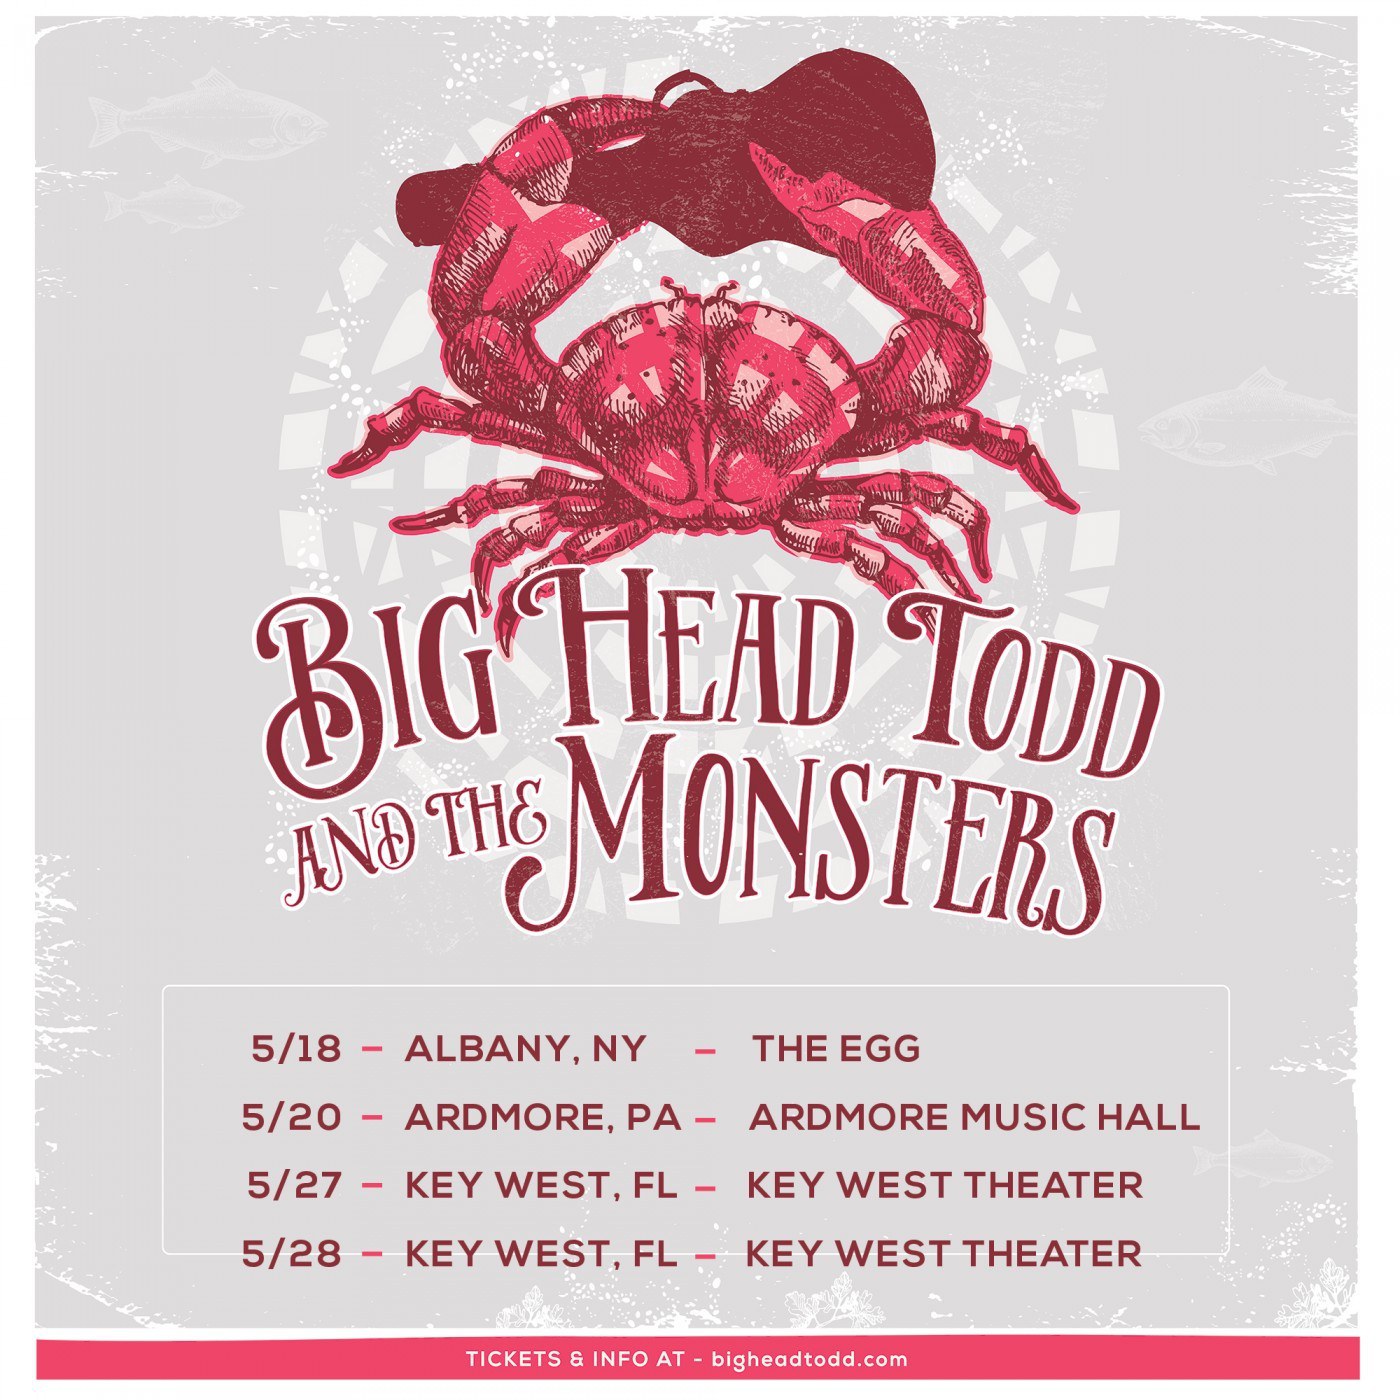 Big Head Todd and The Monsters are making their way along the East Coast this May!